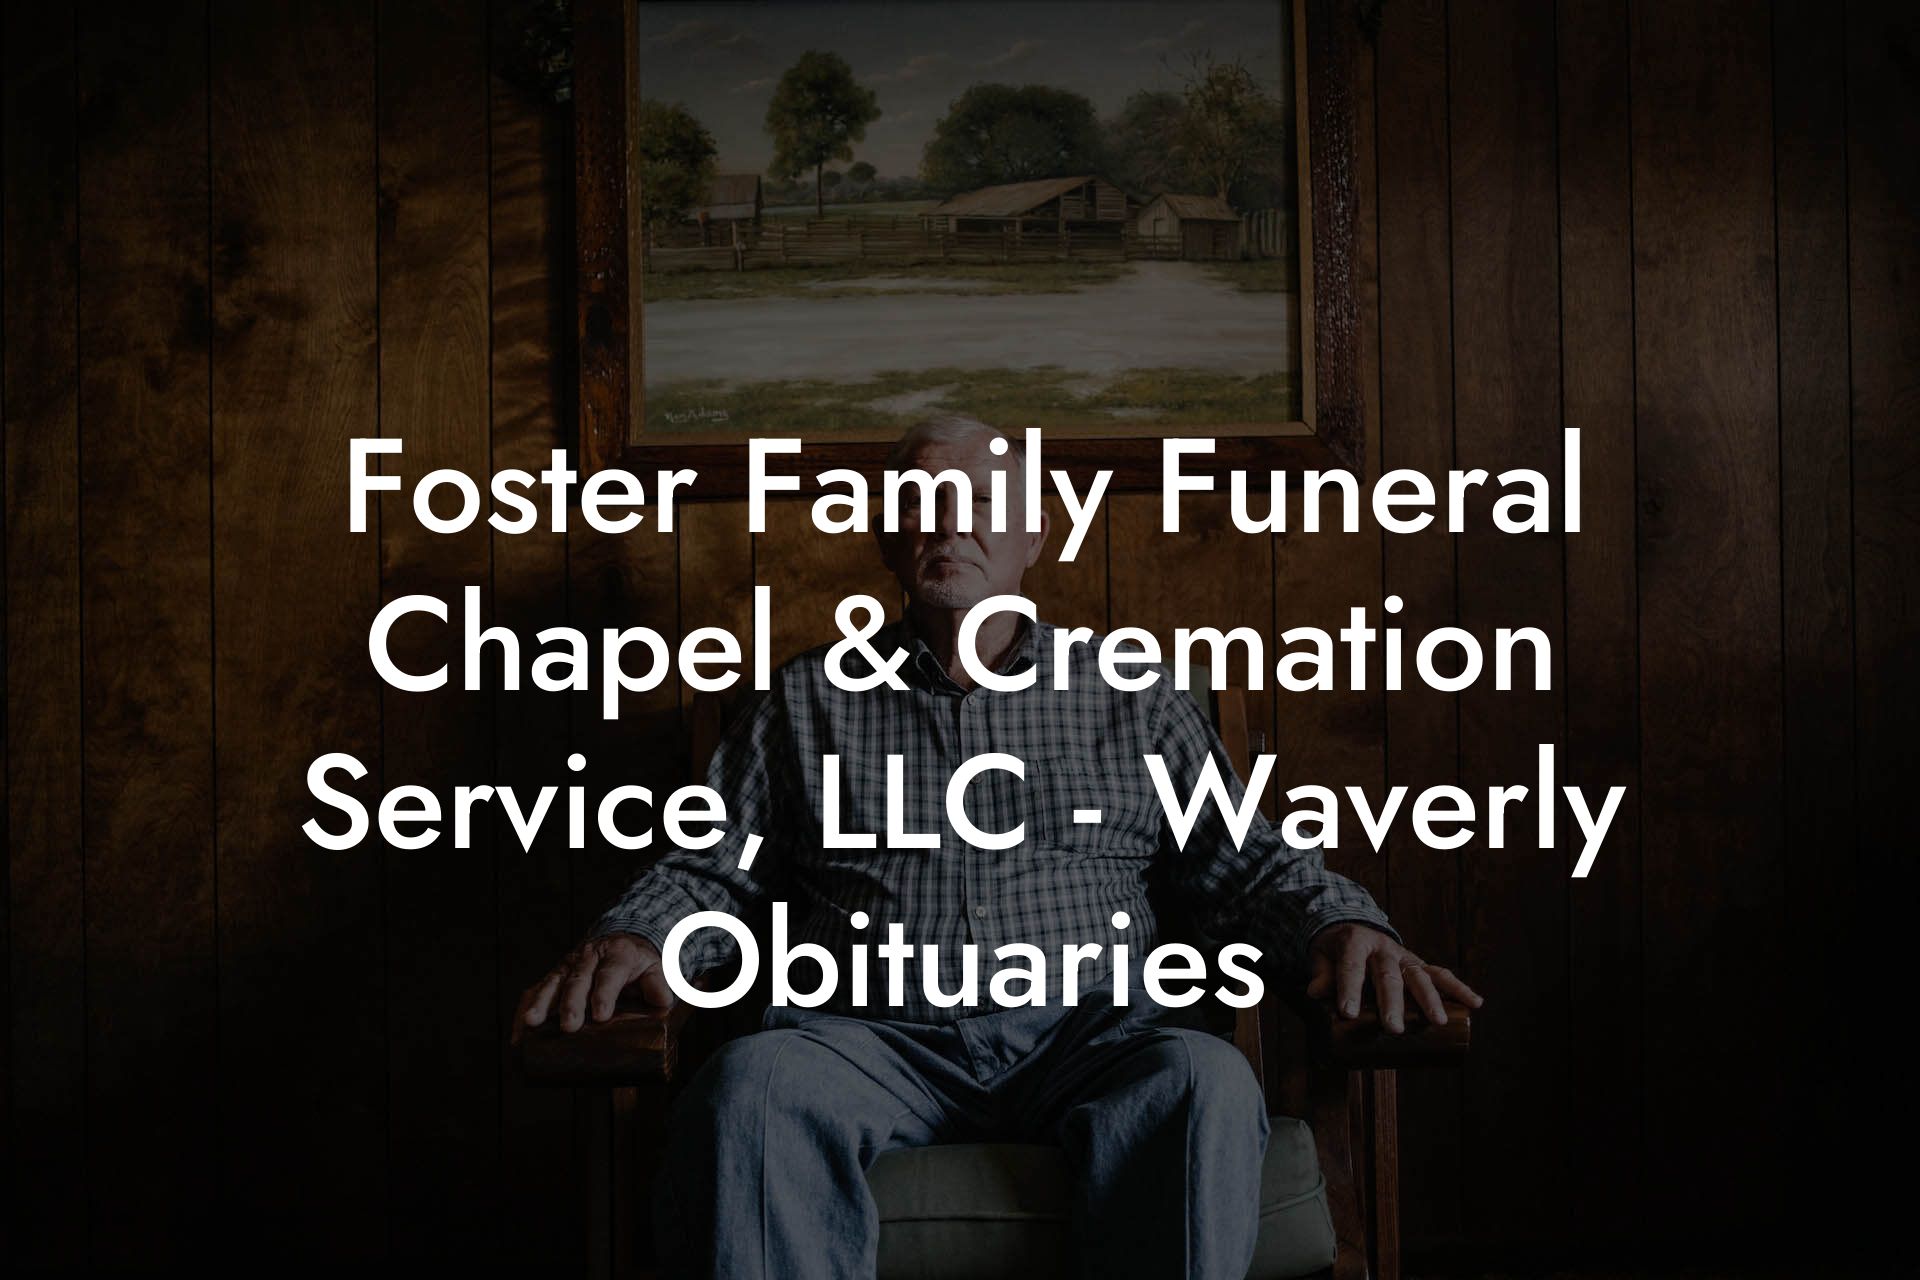 Foster Family Funeral Chapel & Cremation Service, LLC - Waverly Obituaries